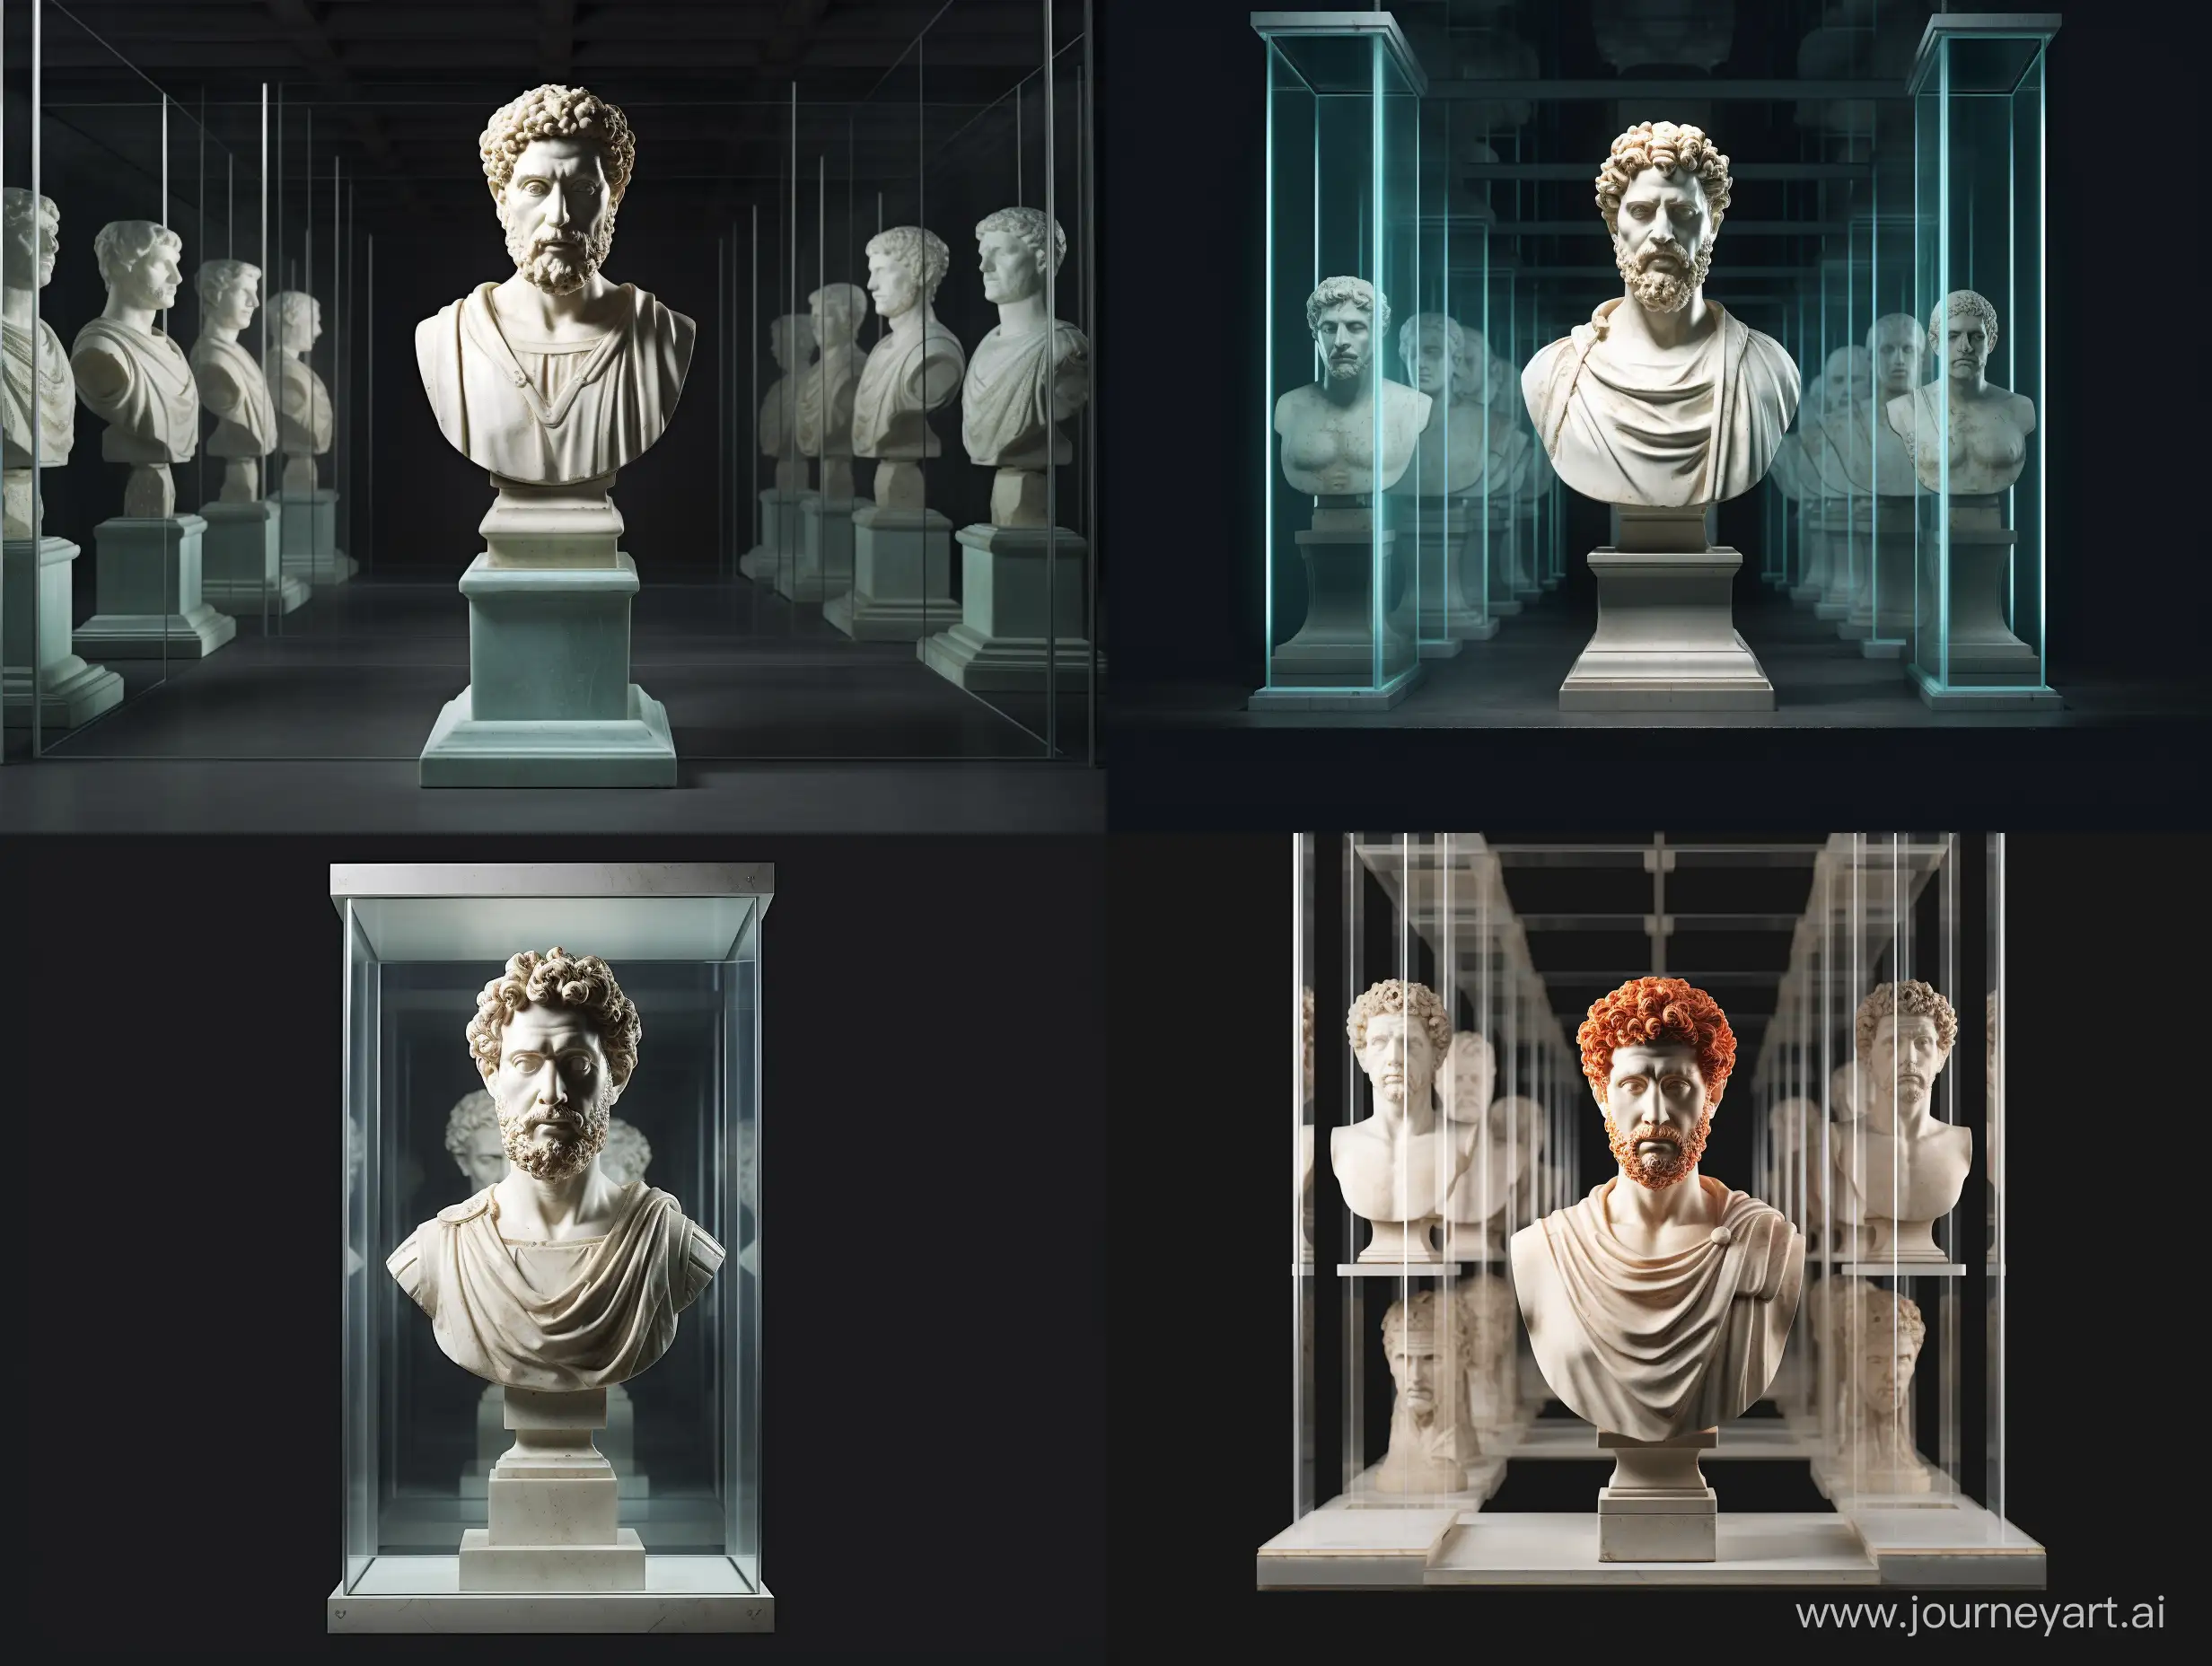 Row-of-Stoic-Heads-in-Glass-Containers-with-Cinematic-Lighting